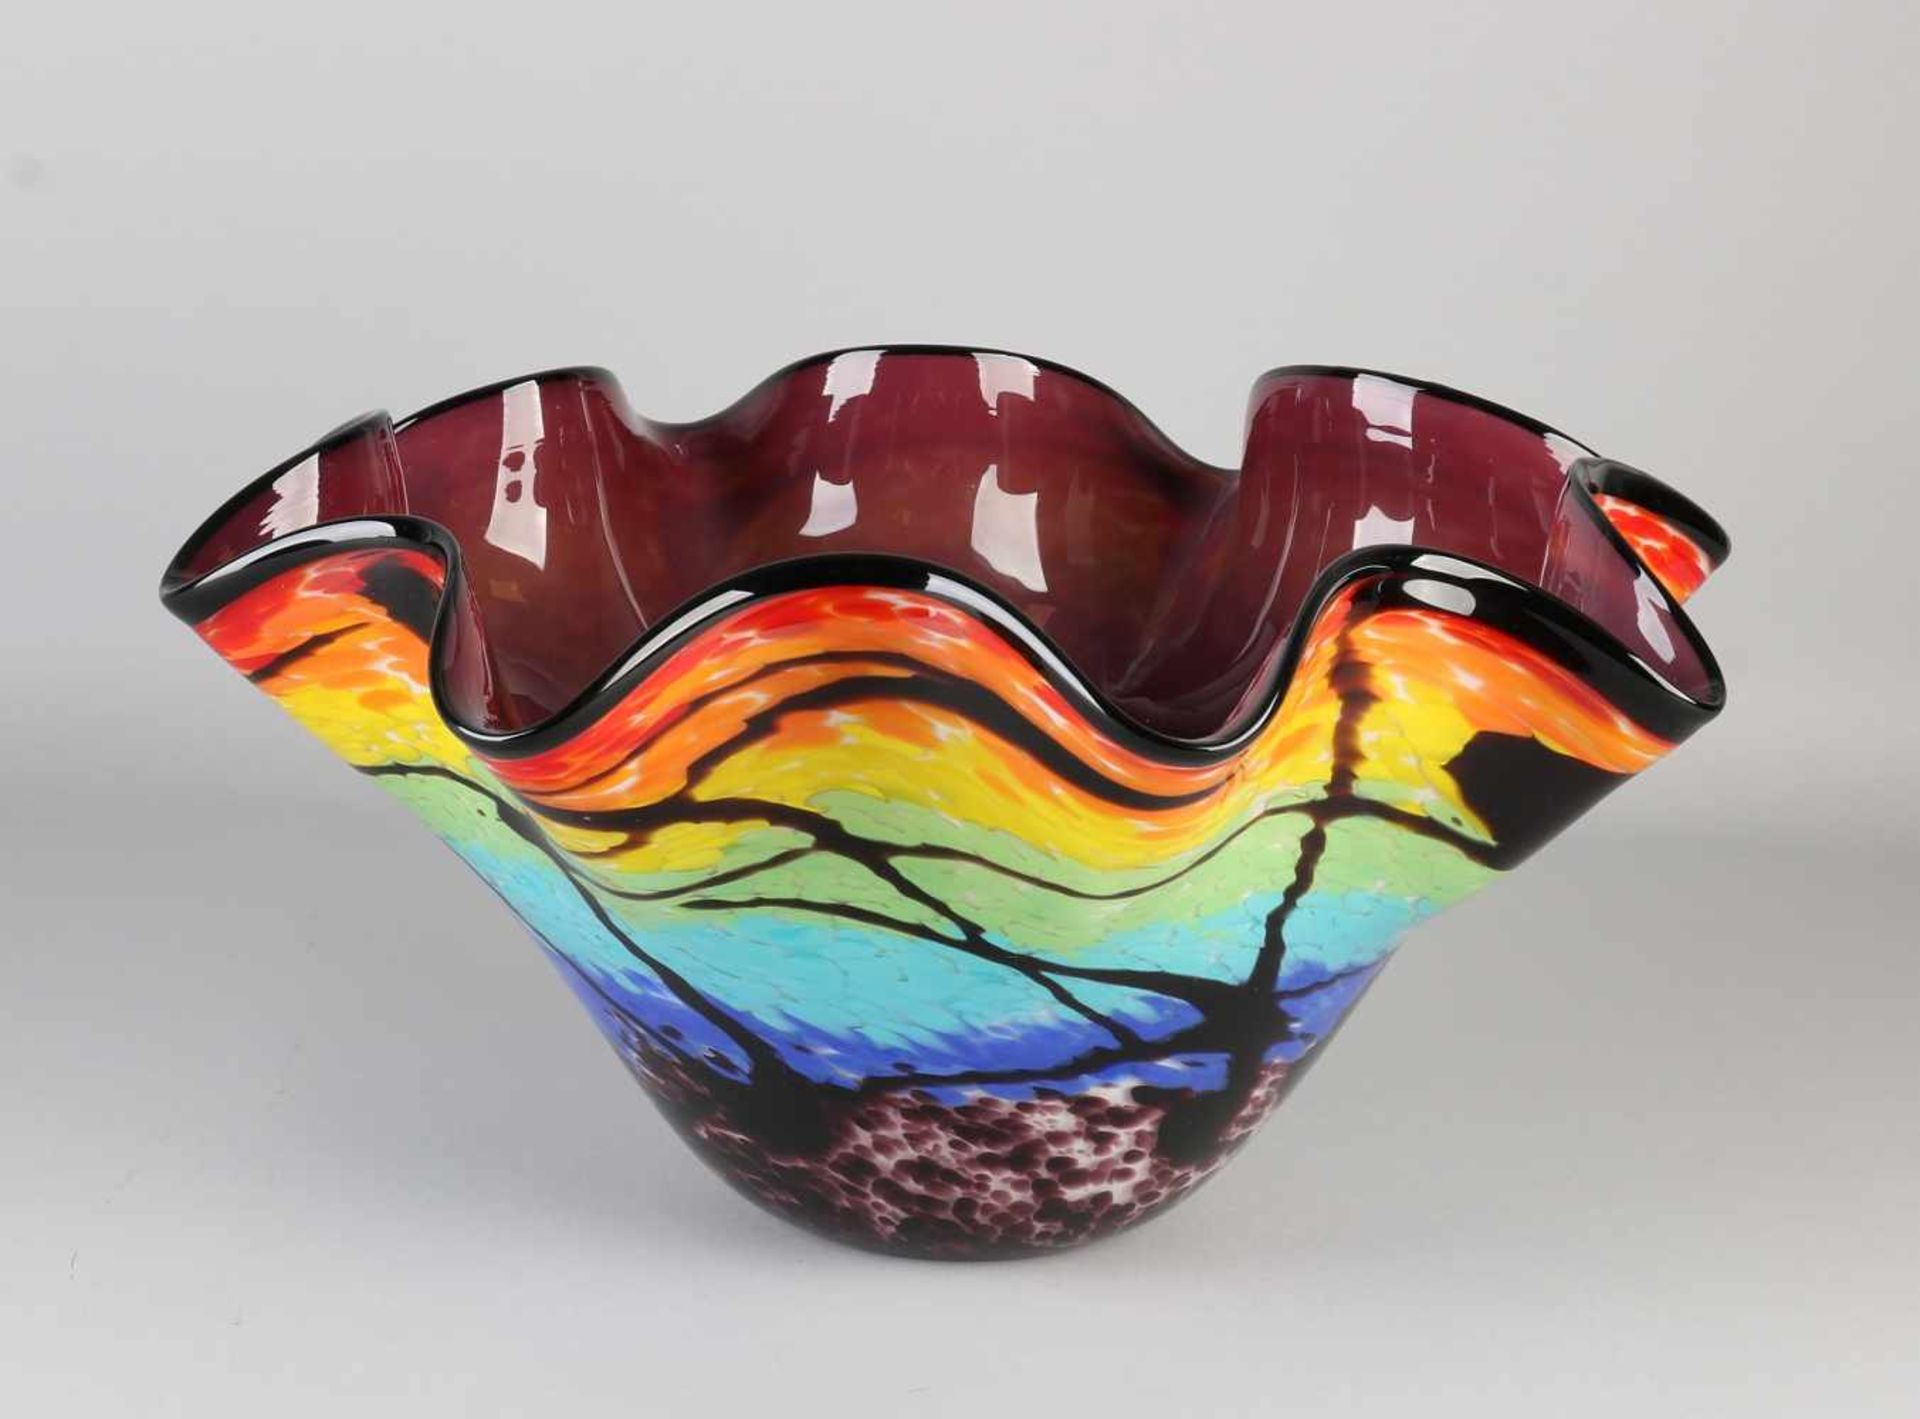 Large Murano glass fusing style bowl with scalloped edge. 21st century. Size: 20 x 40 x 40 cm. In